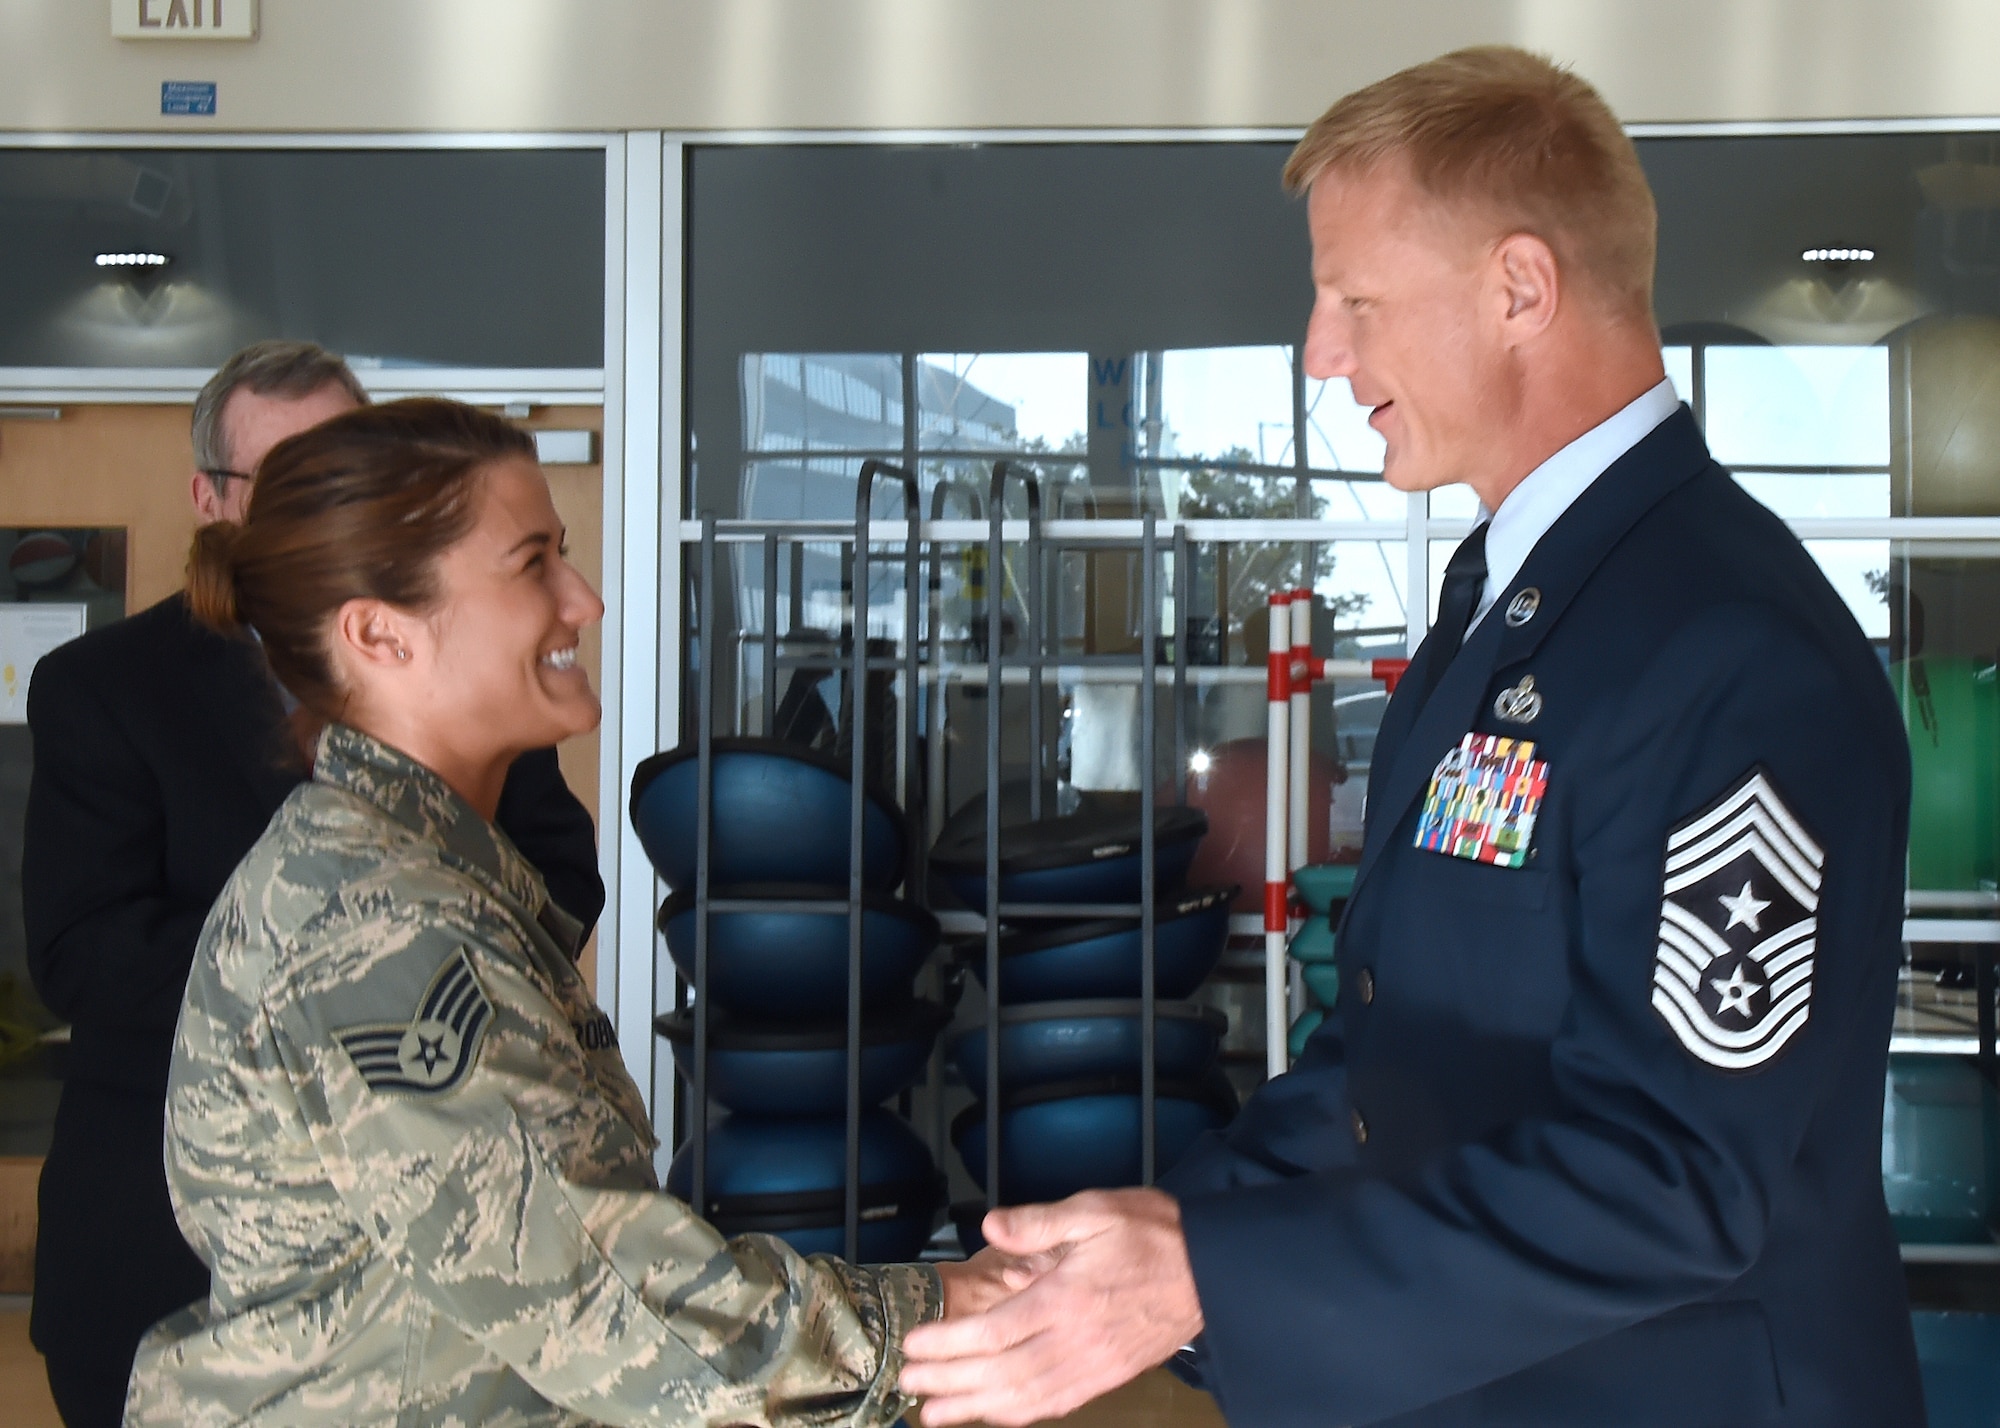 Chief Master Sgt. Craig Hall, Space and Missile Systems Center command chief, congratulates Staff Sgt. Katelin Robinson on her selection for Officer Training School through the Senior Leader Enlisted Commissioning Program. Robinson is the 61st Medical Squadron's noncommissioned officer in charge of Dental Logistics at the Los Angeles Air Force Base medical clinic in El Segundo, Calif. (U.S. Air Force photo/Sarah Corrice)